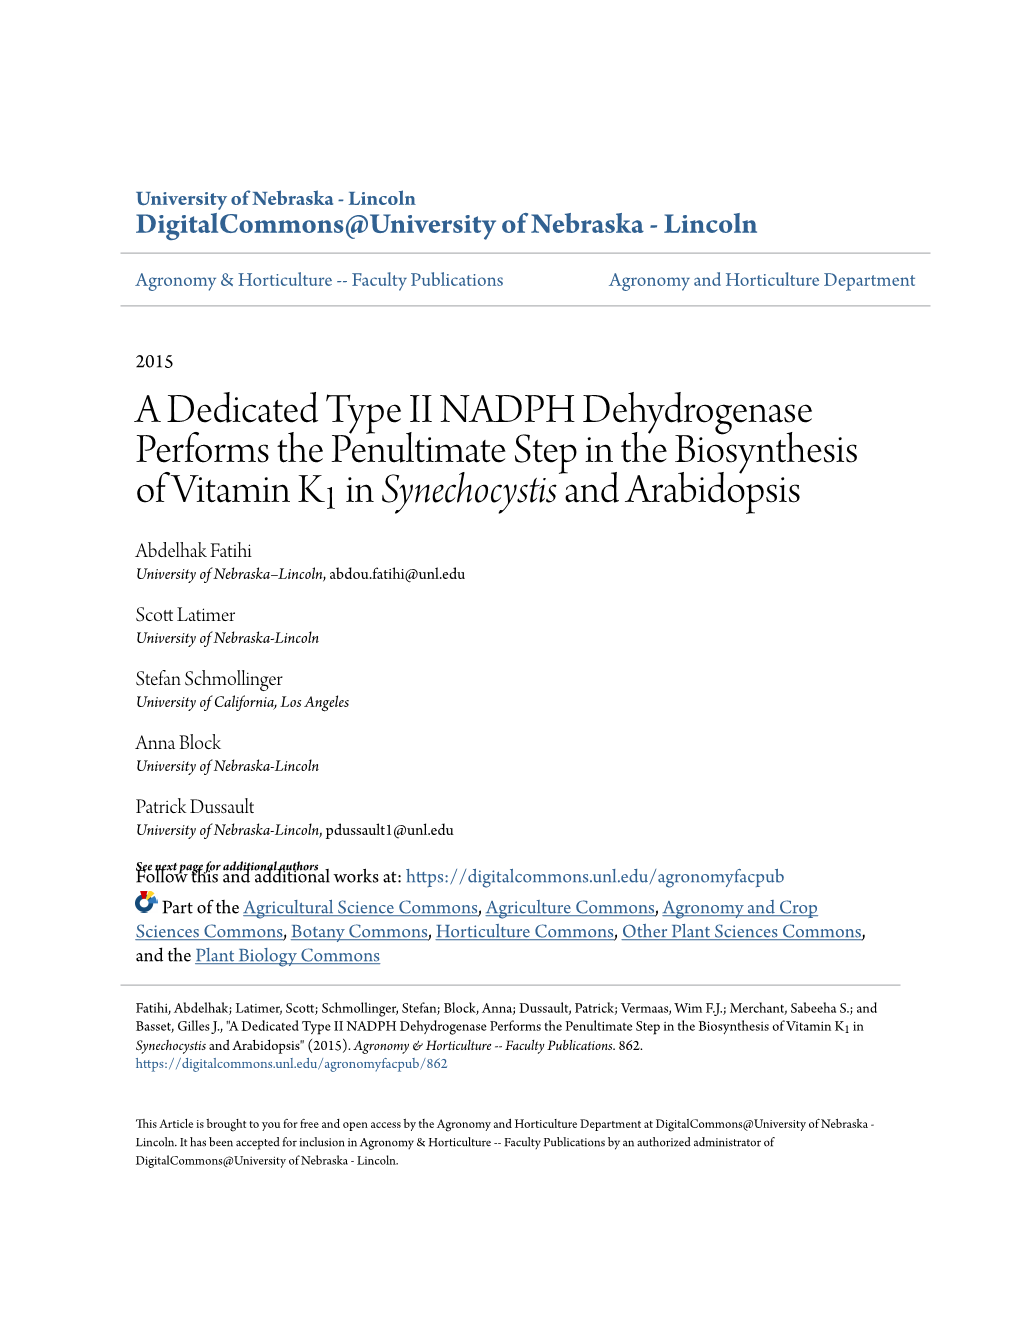 A Dedicated Type II NADPH Dehydrogenase Performs the Penultimate Step in the Biosynthesis of Vitamin K1 in Synechocystis and Arabidopsis